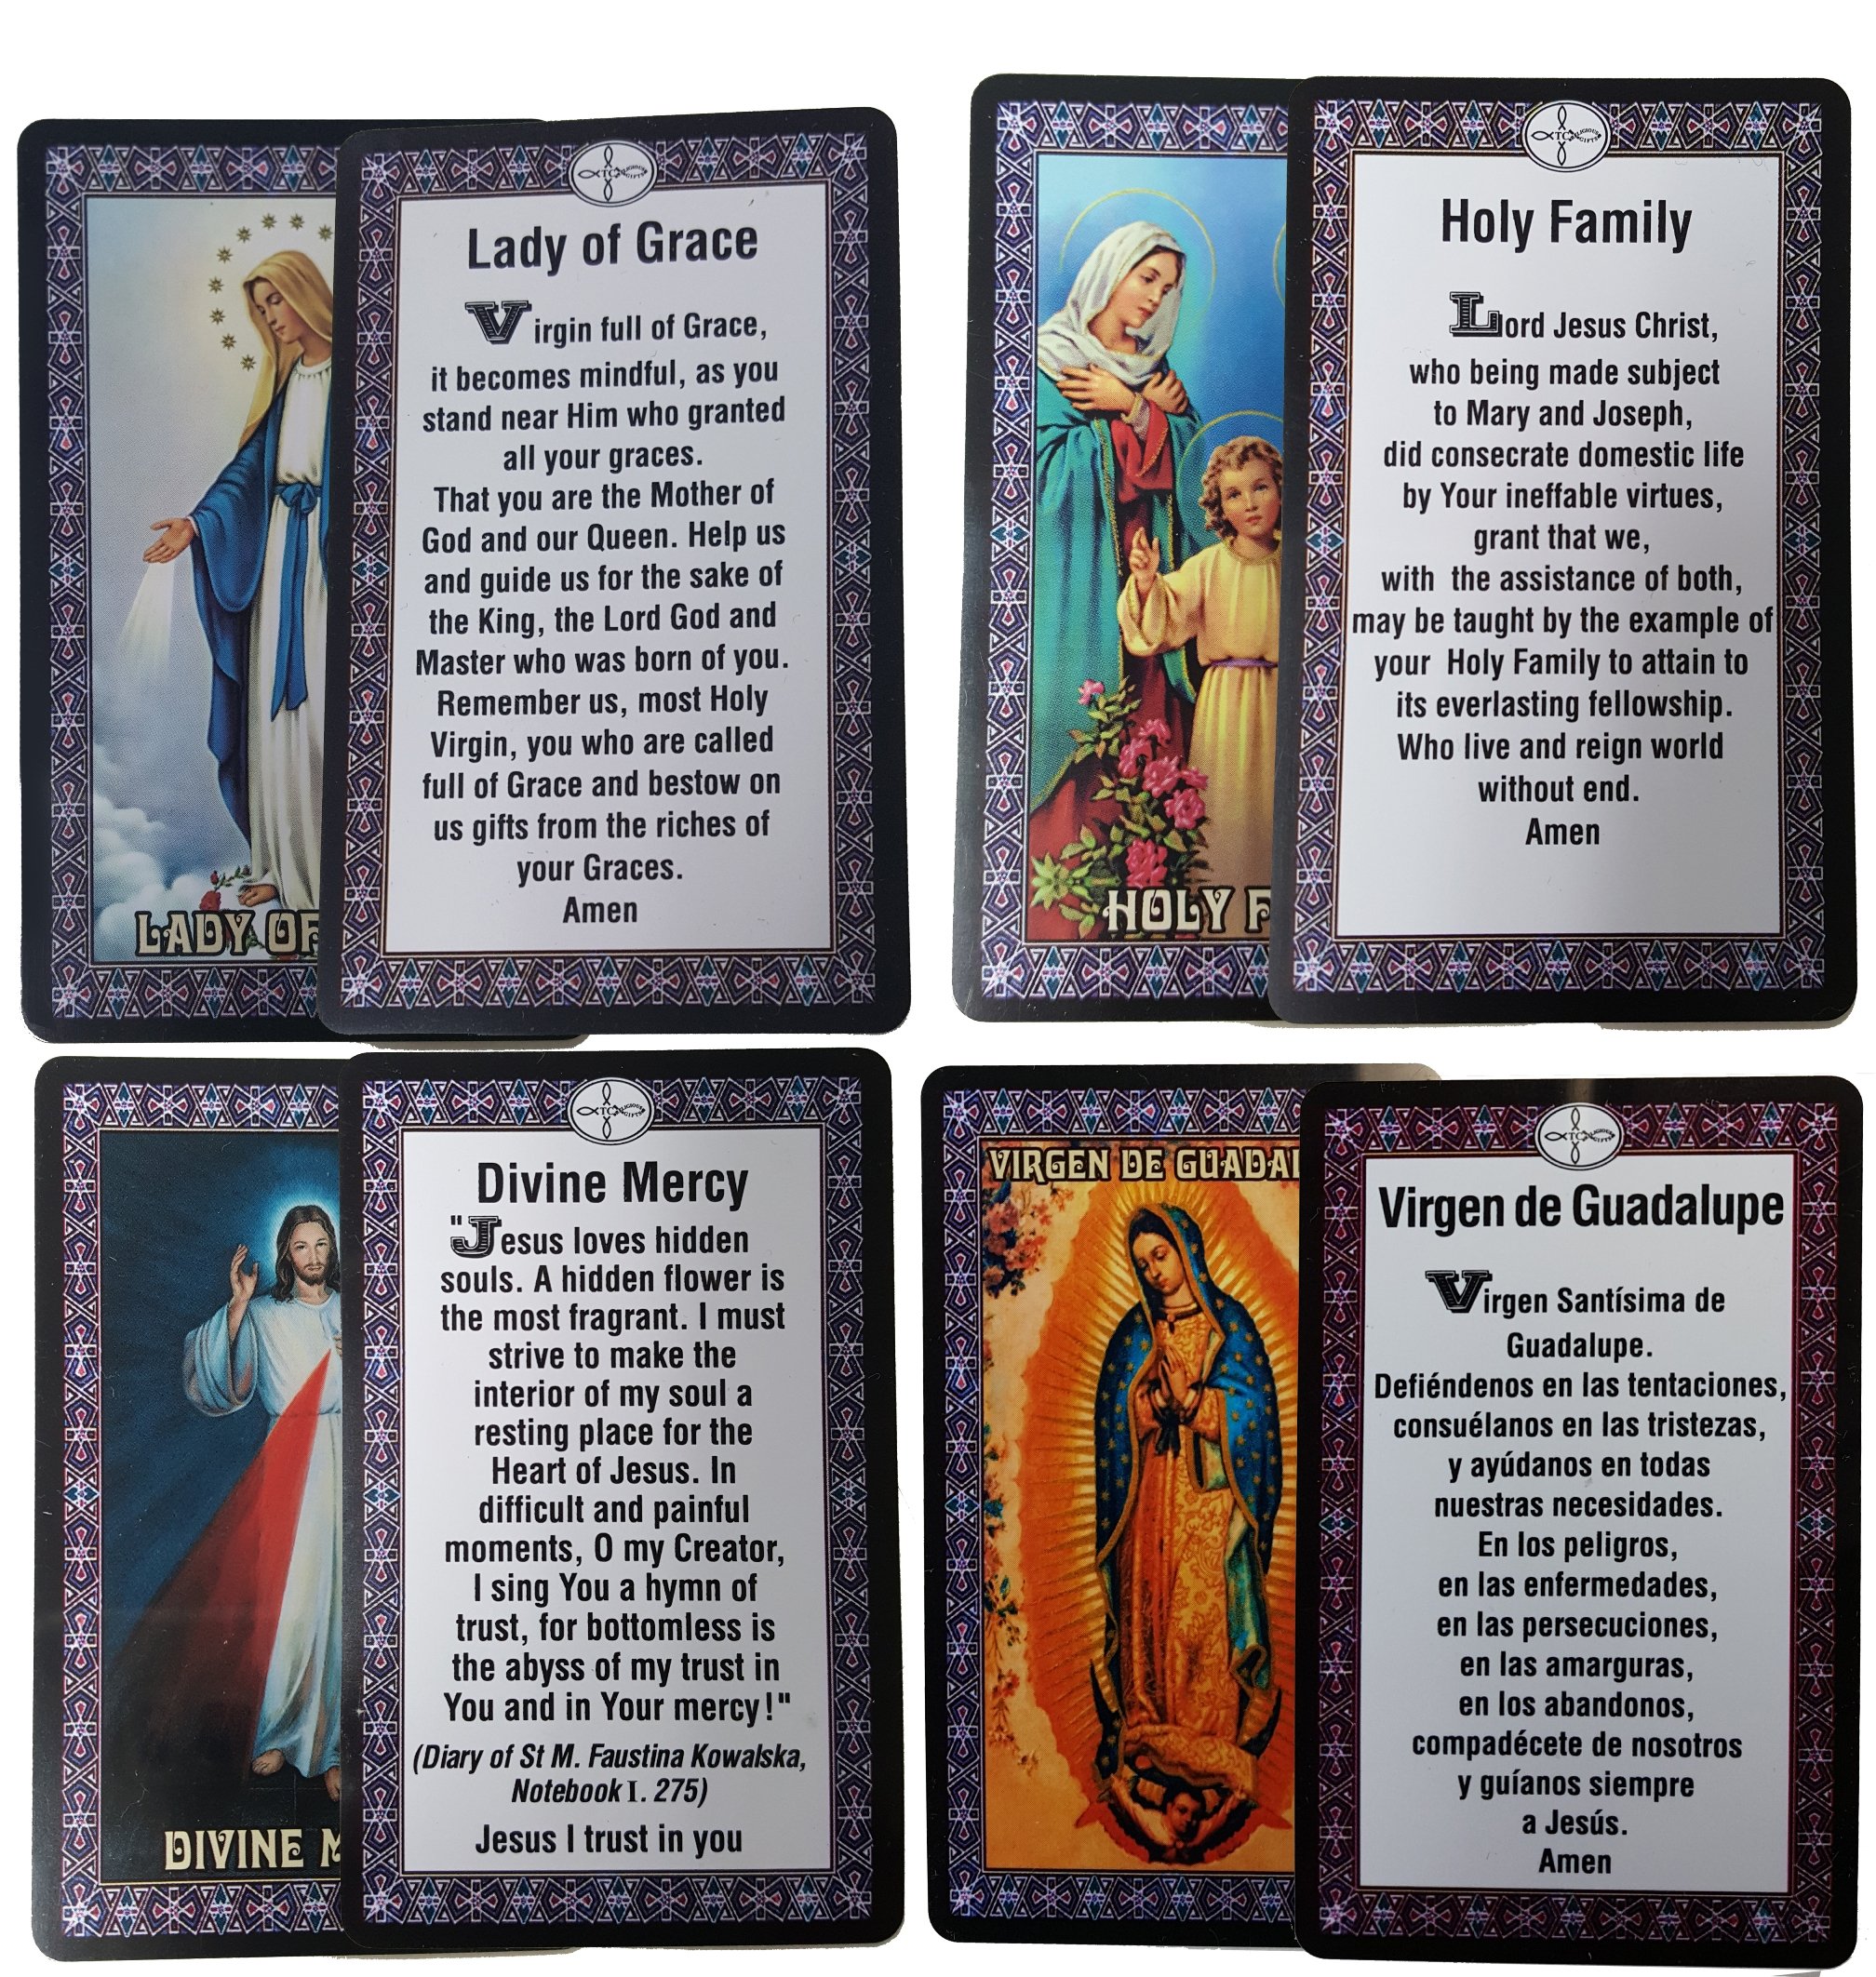 Catholic SET of 10 Holy Prayer Cards - New Plastic material! St Benedict St Jude St Michael St Christopher Holy Family L of Guadalupe L of Miraculous L of Grace L undoer of Knots Divine Mercy